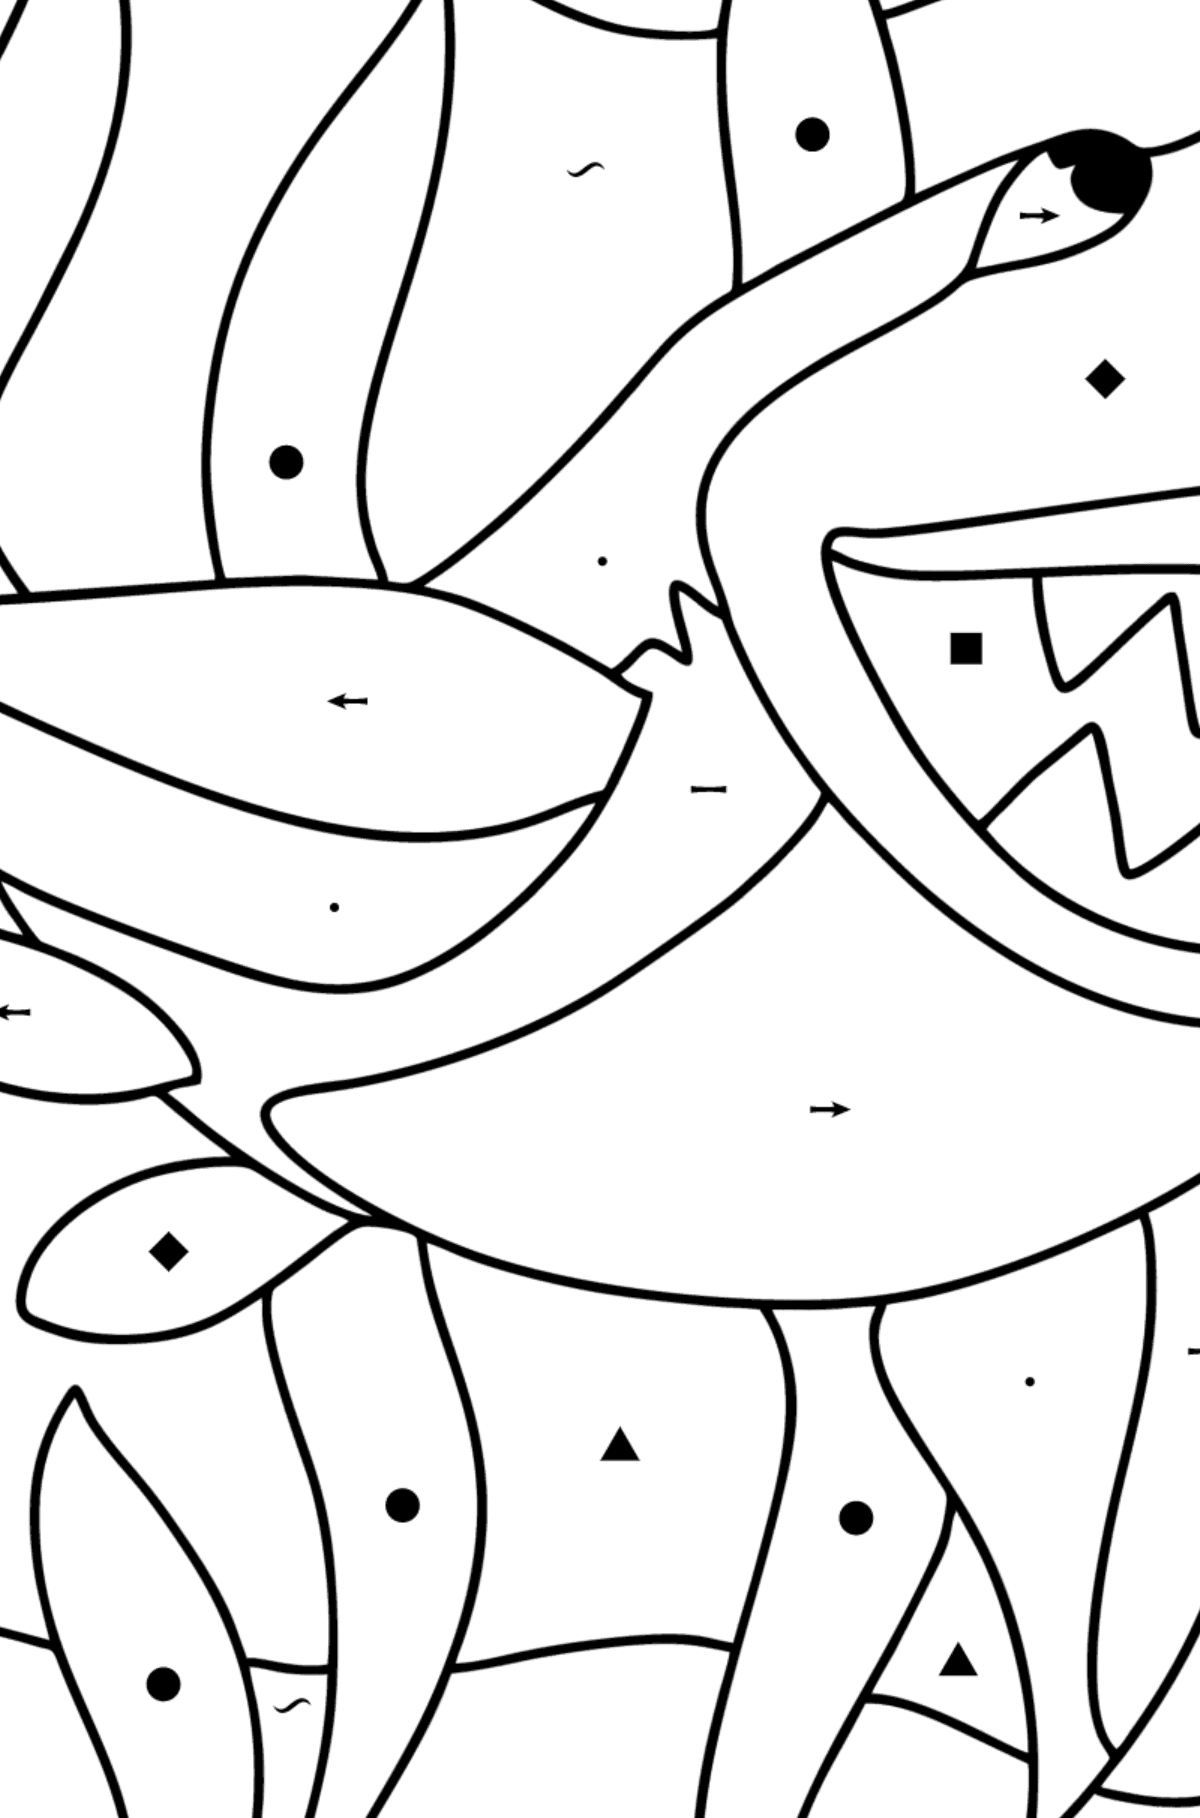 Shark coloring page - Coloring by Symbols for Kids